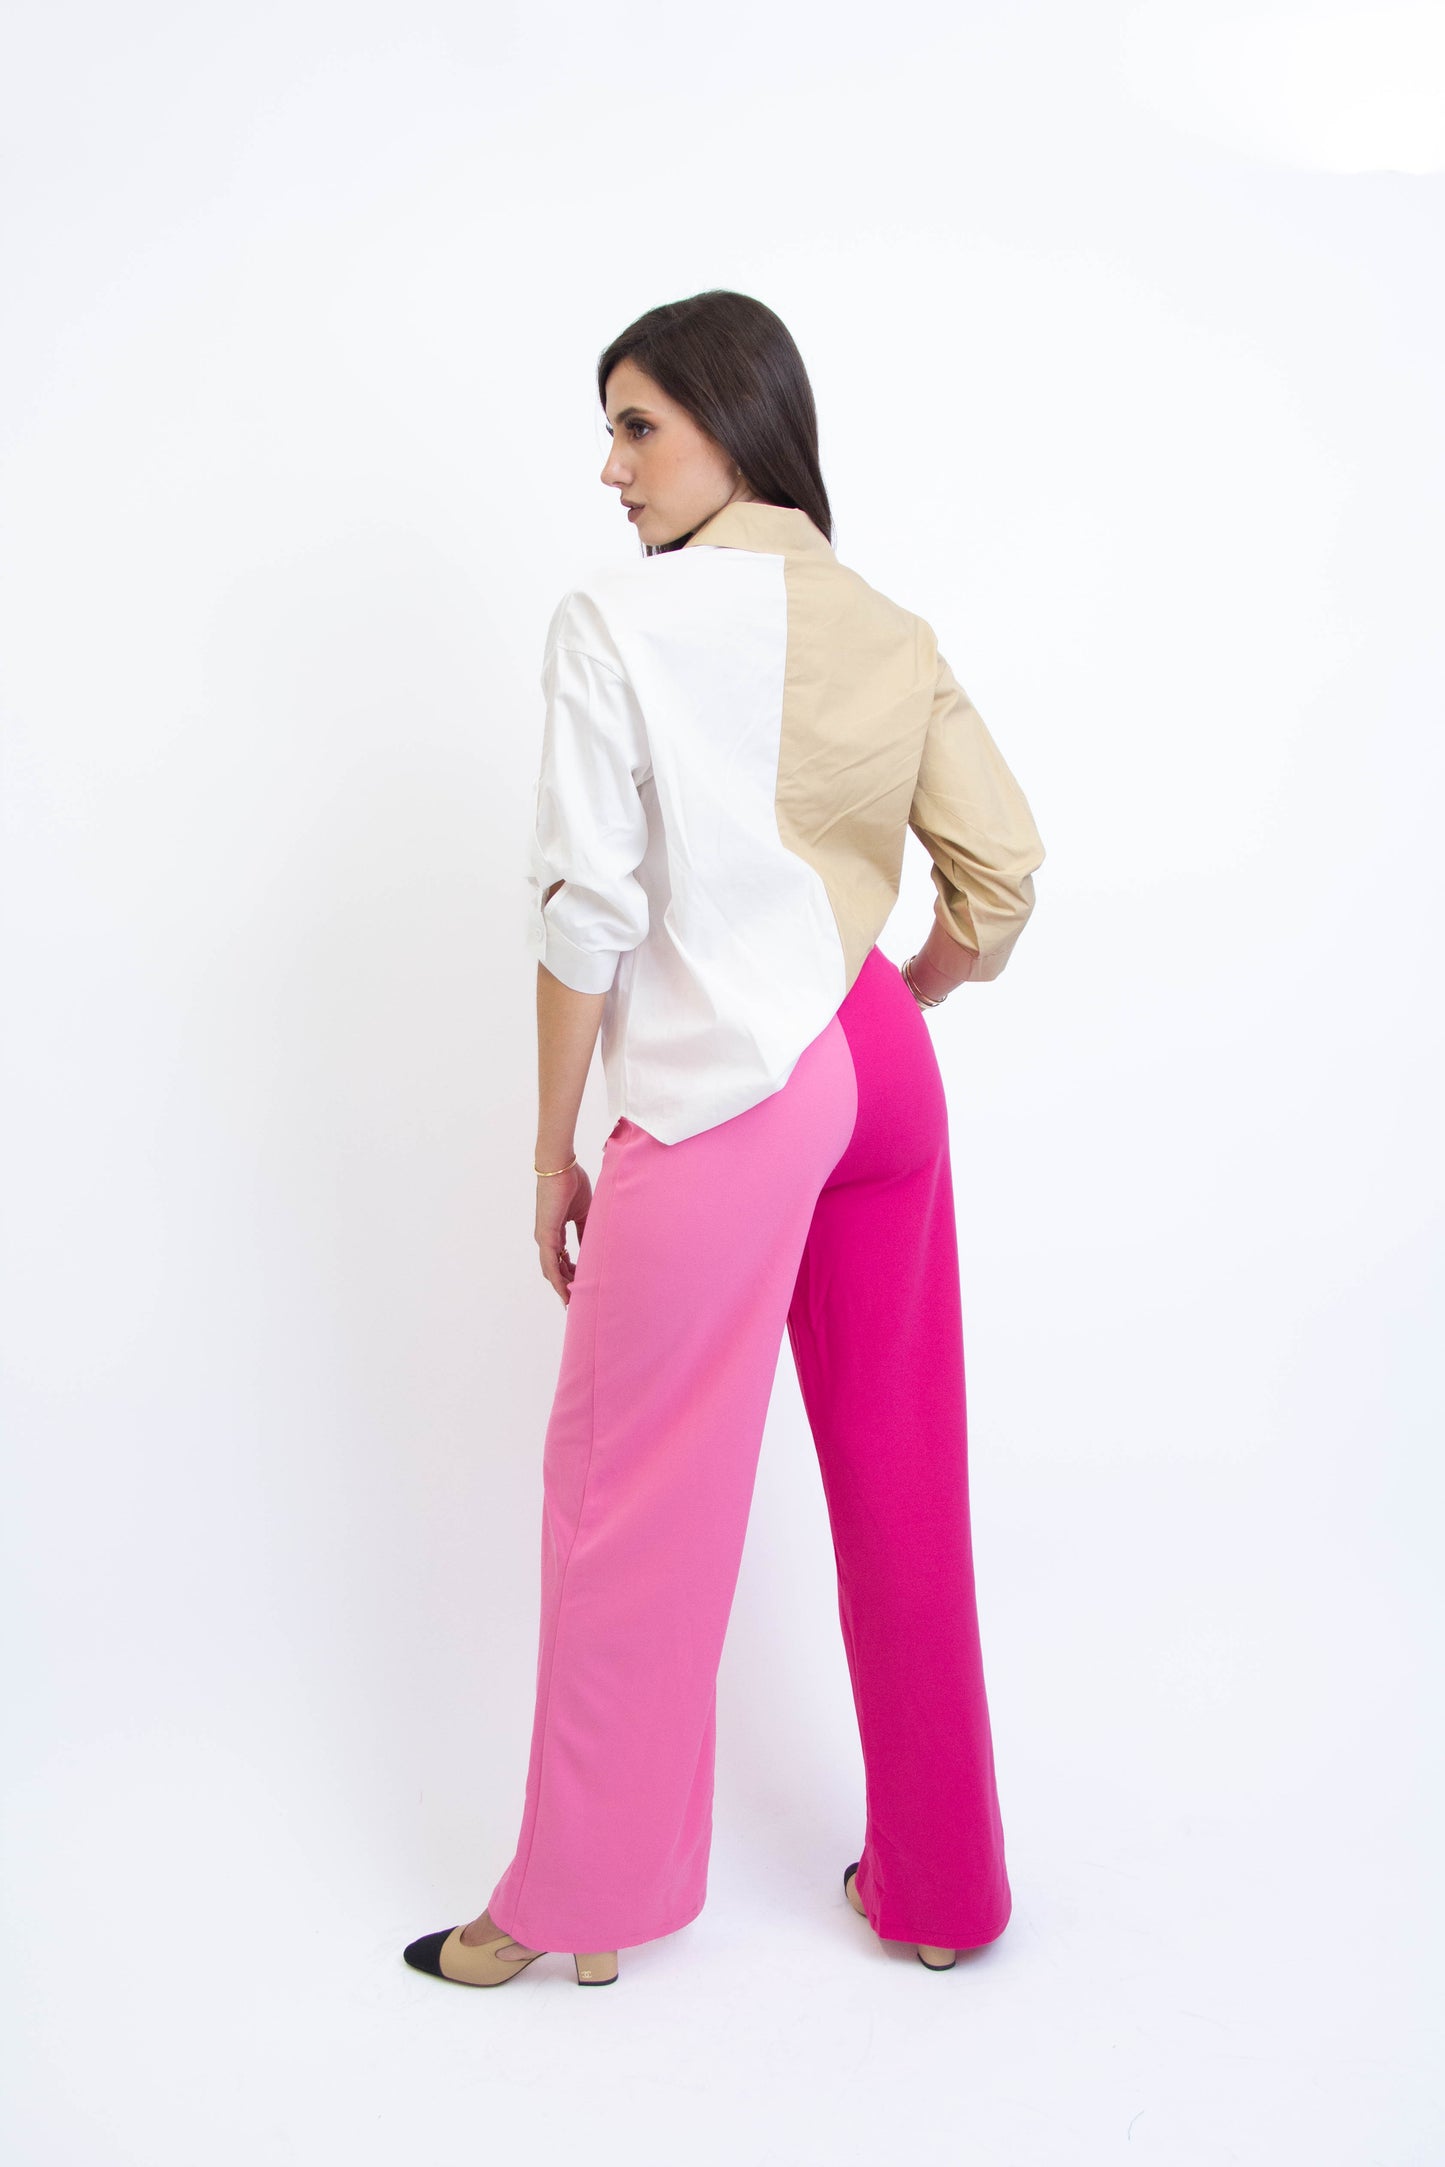 BICOLOR WHITE AND BEIGE LADIES BLOUSE